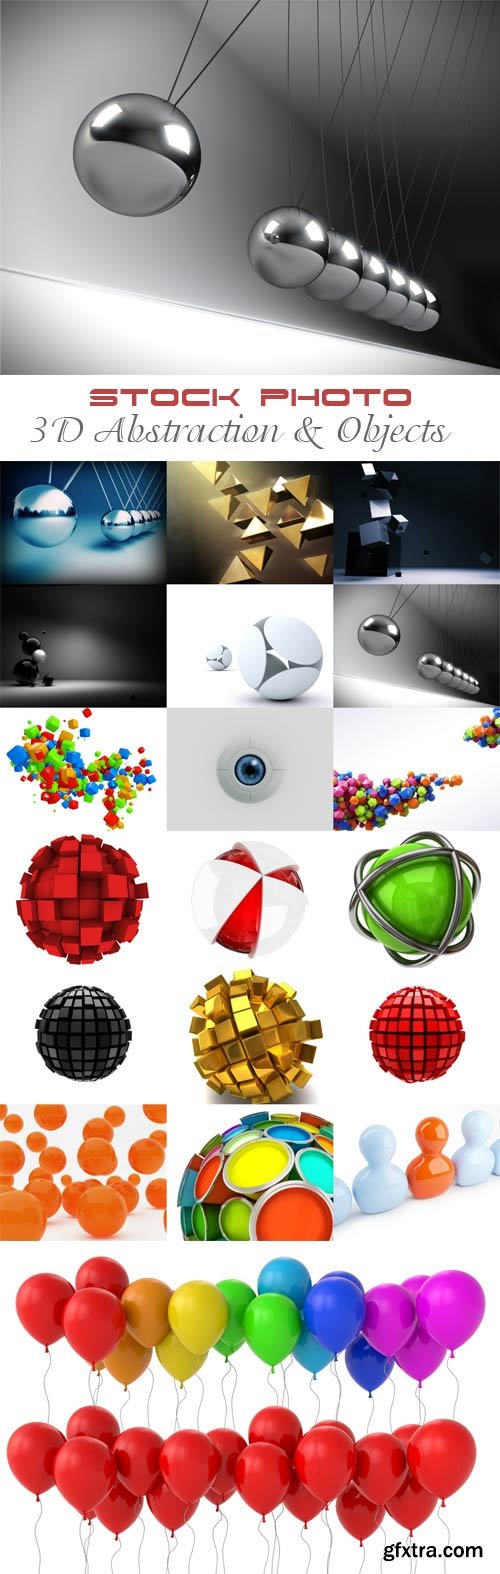 3D Abstraction and Objects